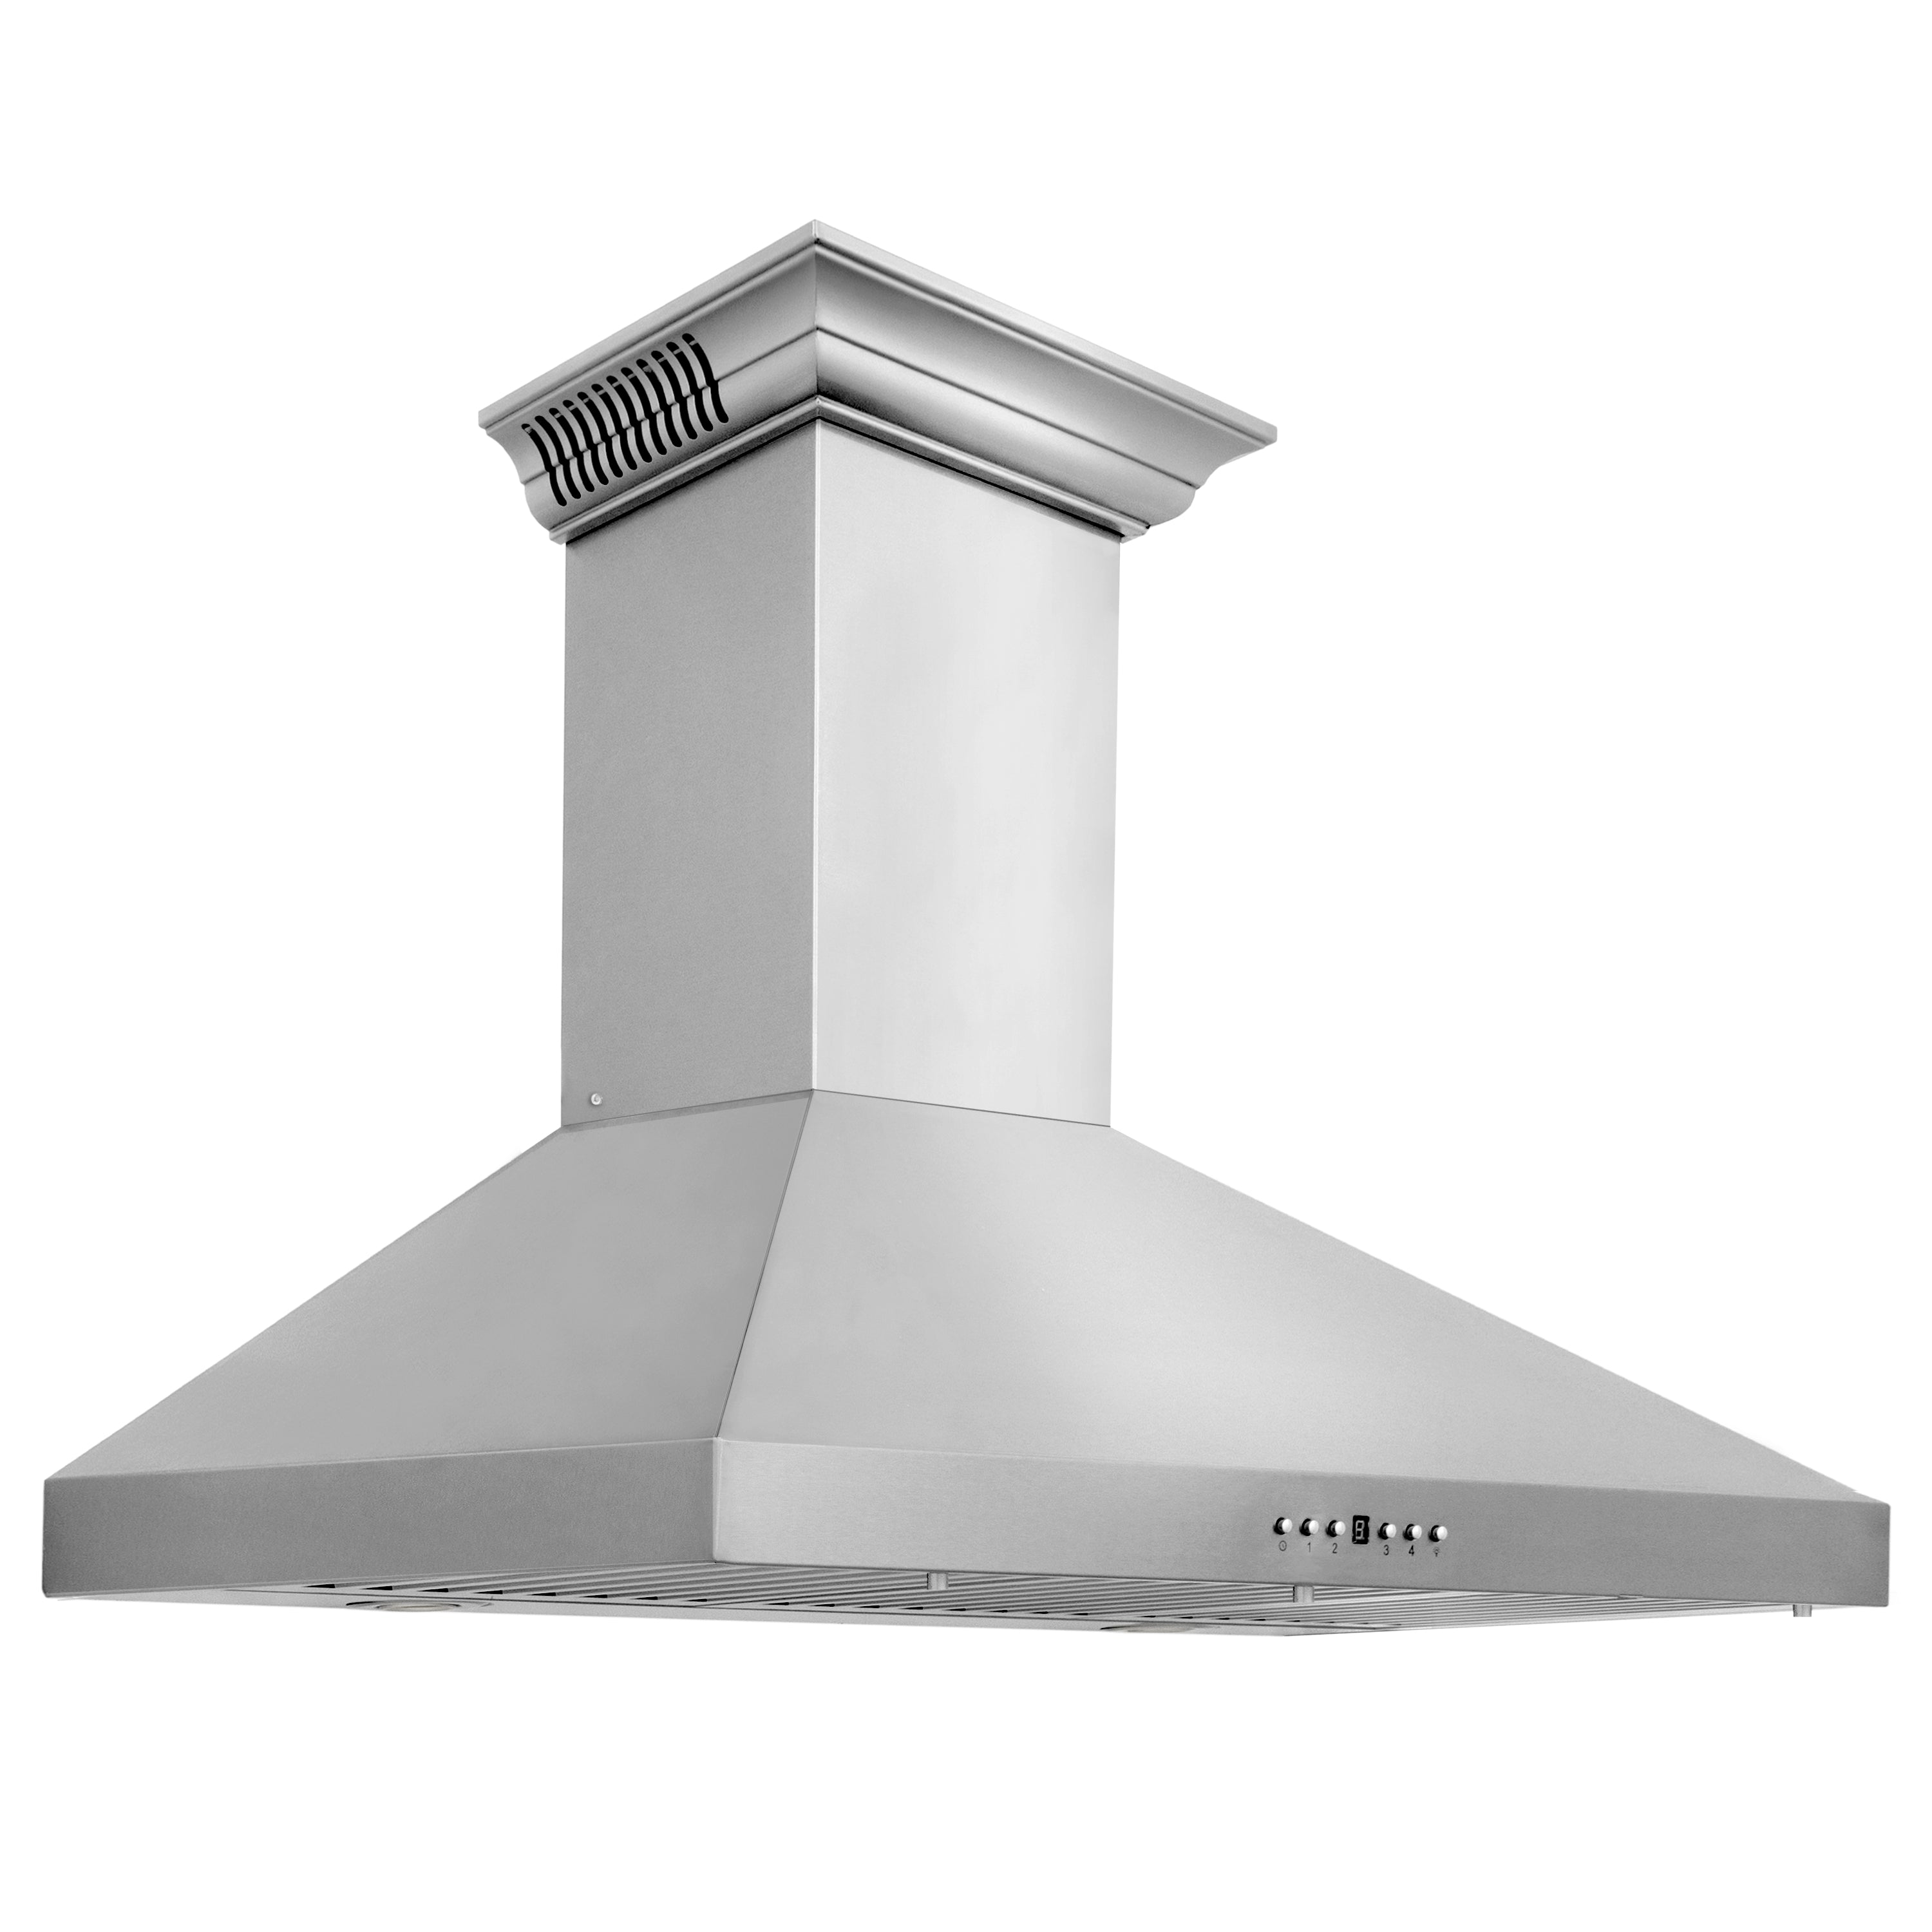 36" ZLINE CrownSound√∞ Ducted Vent Wall Mount Range Hood in Stainless Steel with Built-in Bluetooth Speakers (KL3CRN-BT-36)